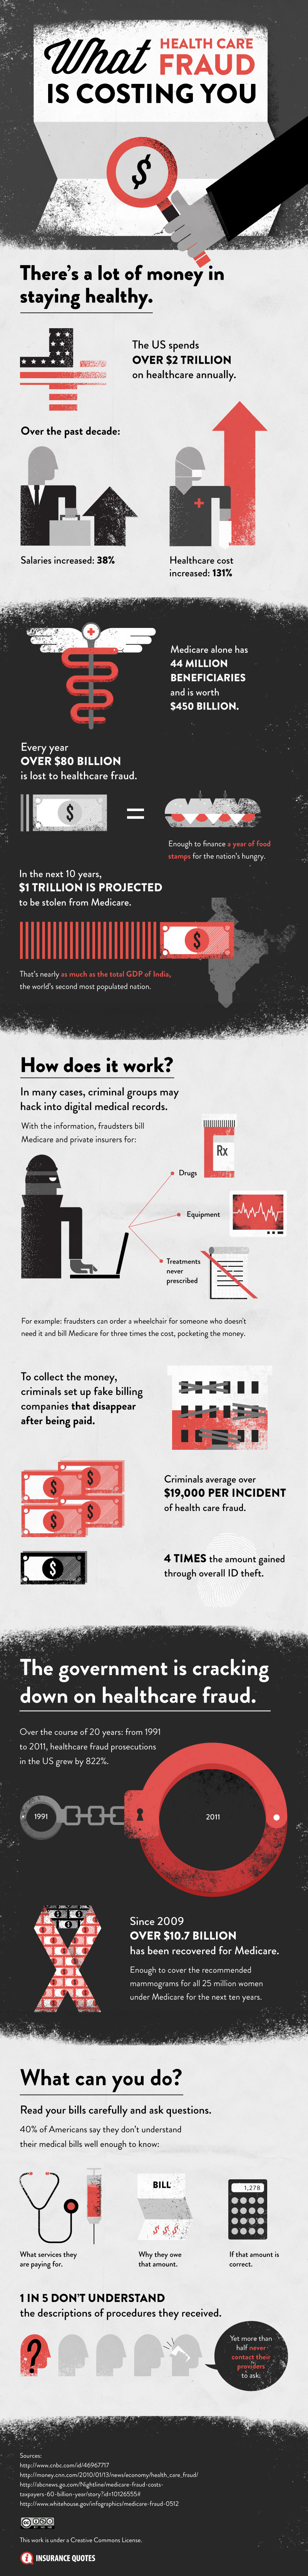 InfoGraphic on the Cost of Healthcare Fraud,